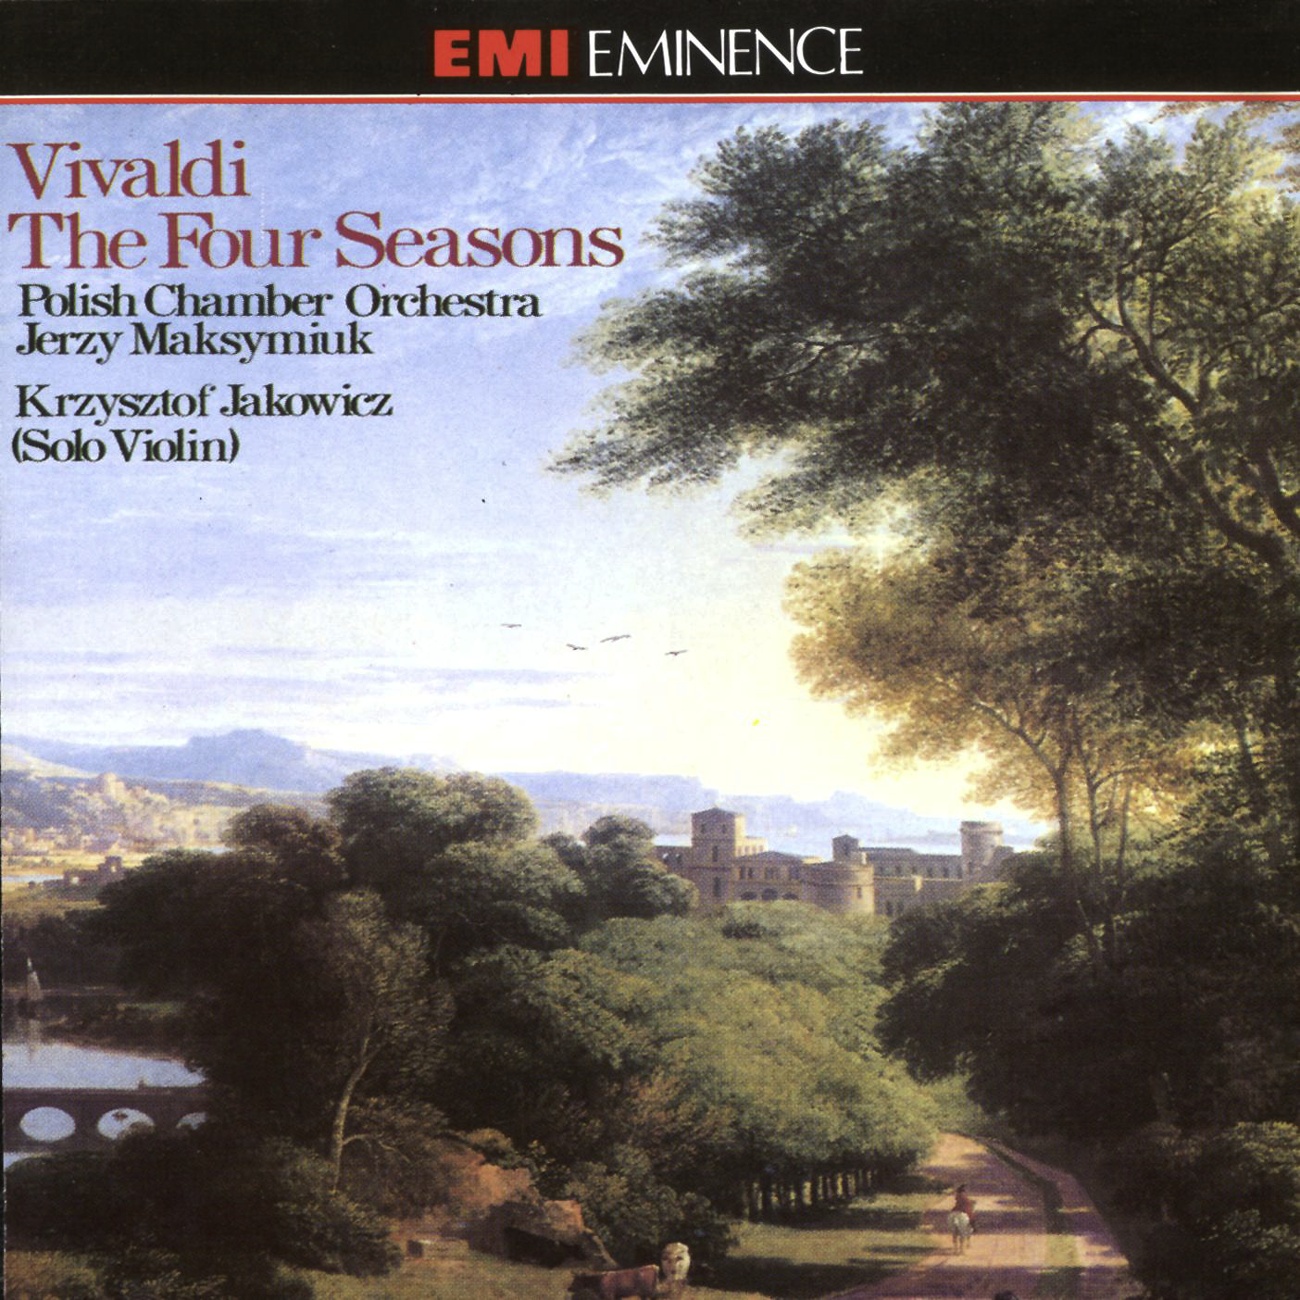 The Four Seasons Op. 8 Nos. 1-4 (1990 Digital Remaster), Concerto No. 3 in F (L'autunno/ Autumn) RV293 (Op. 8 No. 3): I.   Alleg